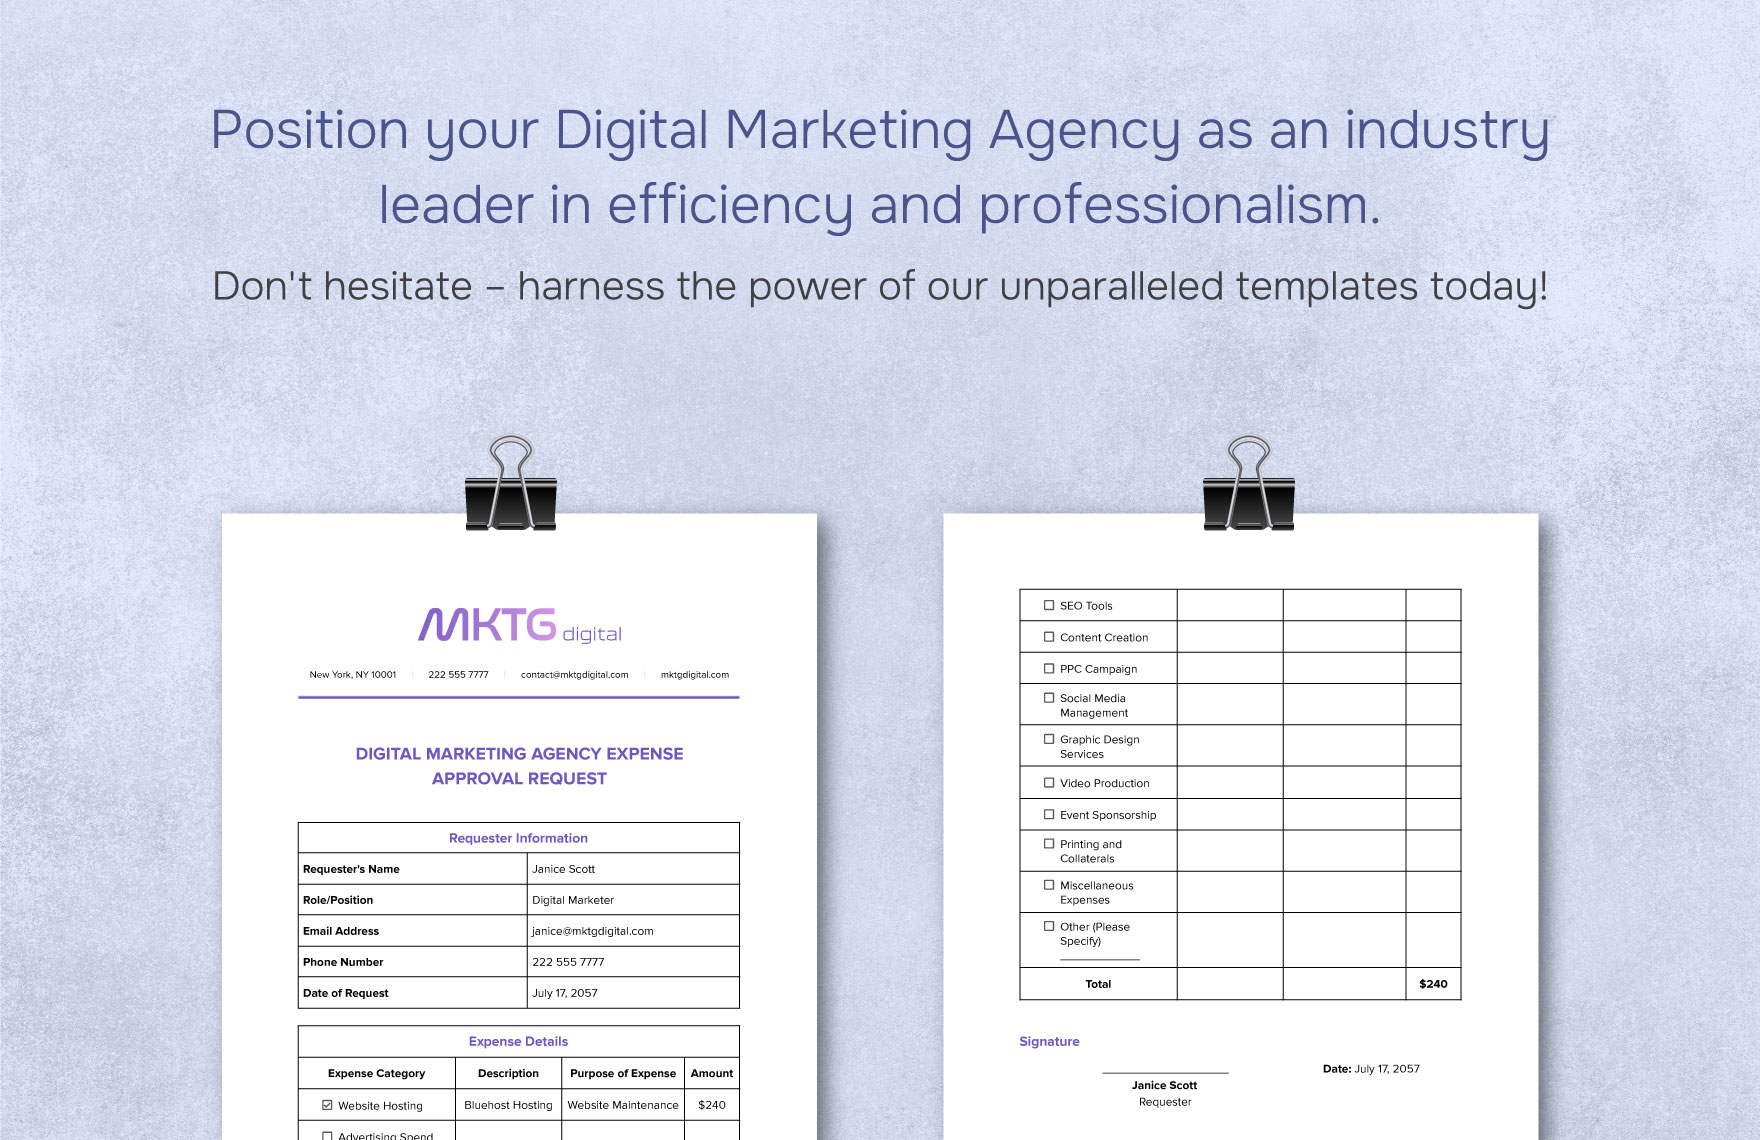 Digital Marketing Agency Expense Approval Request Template